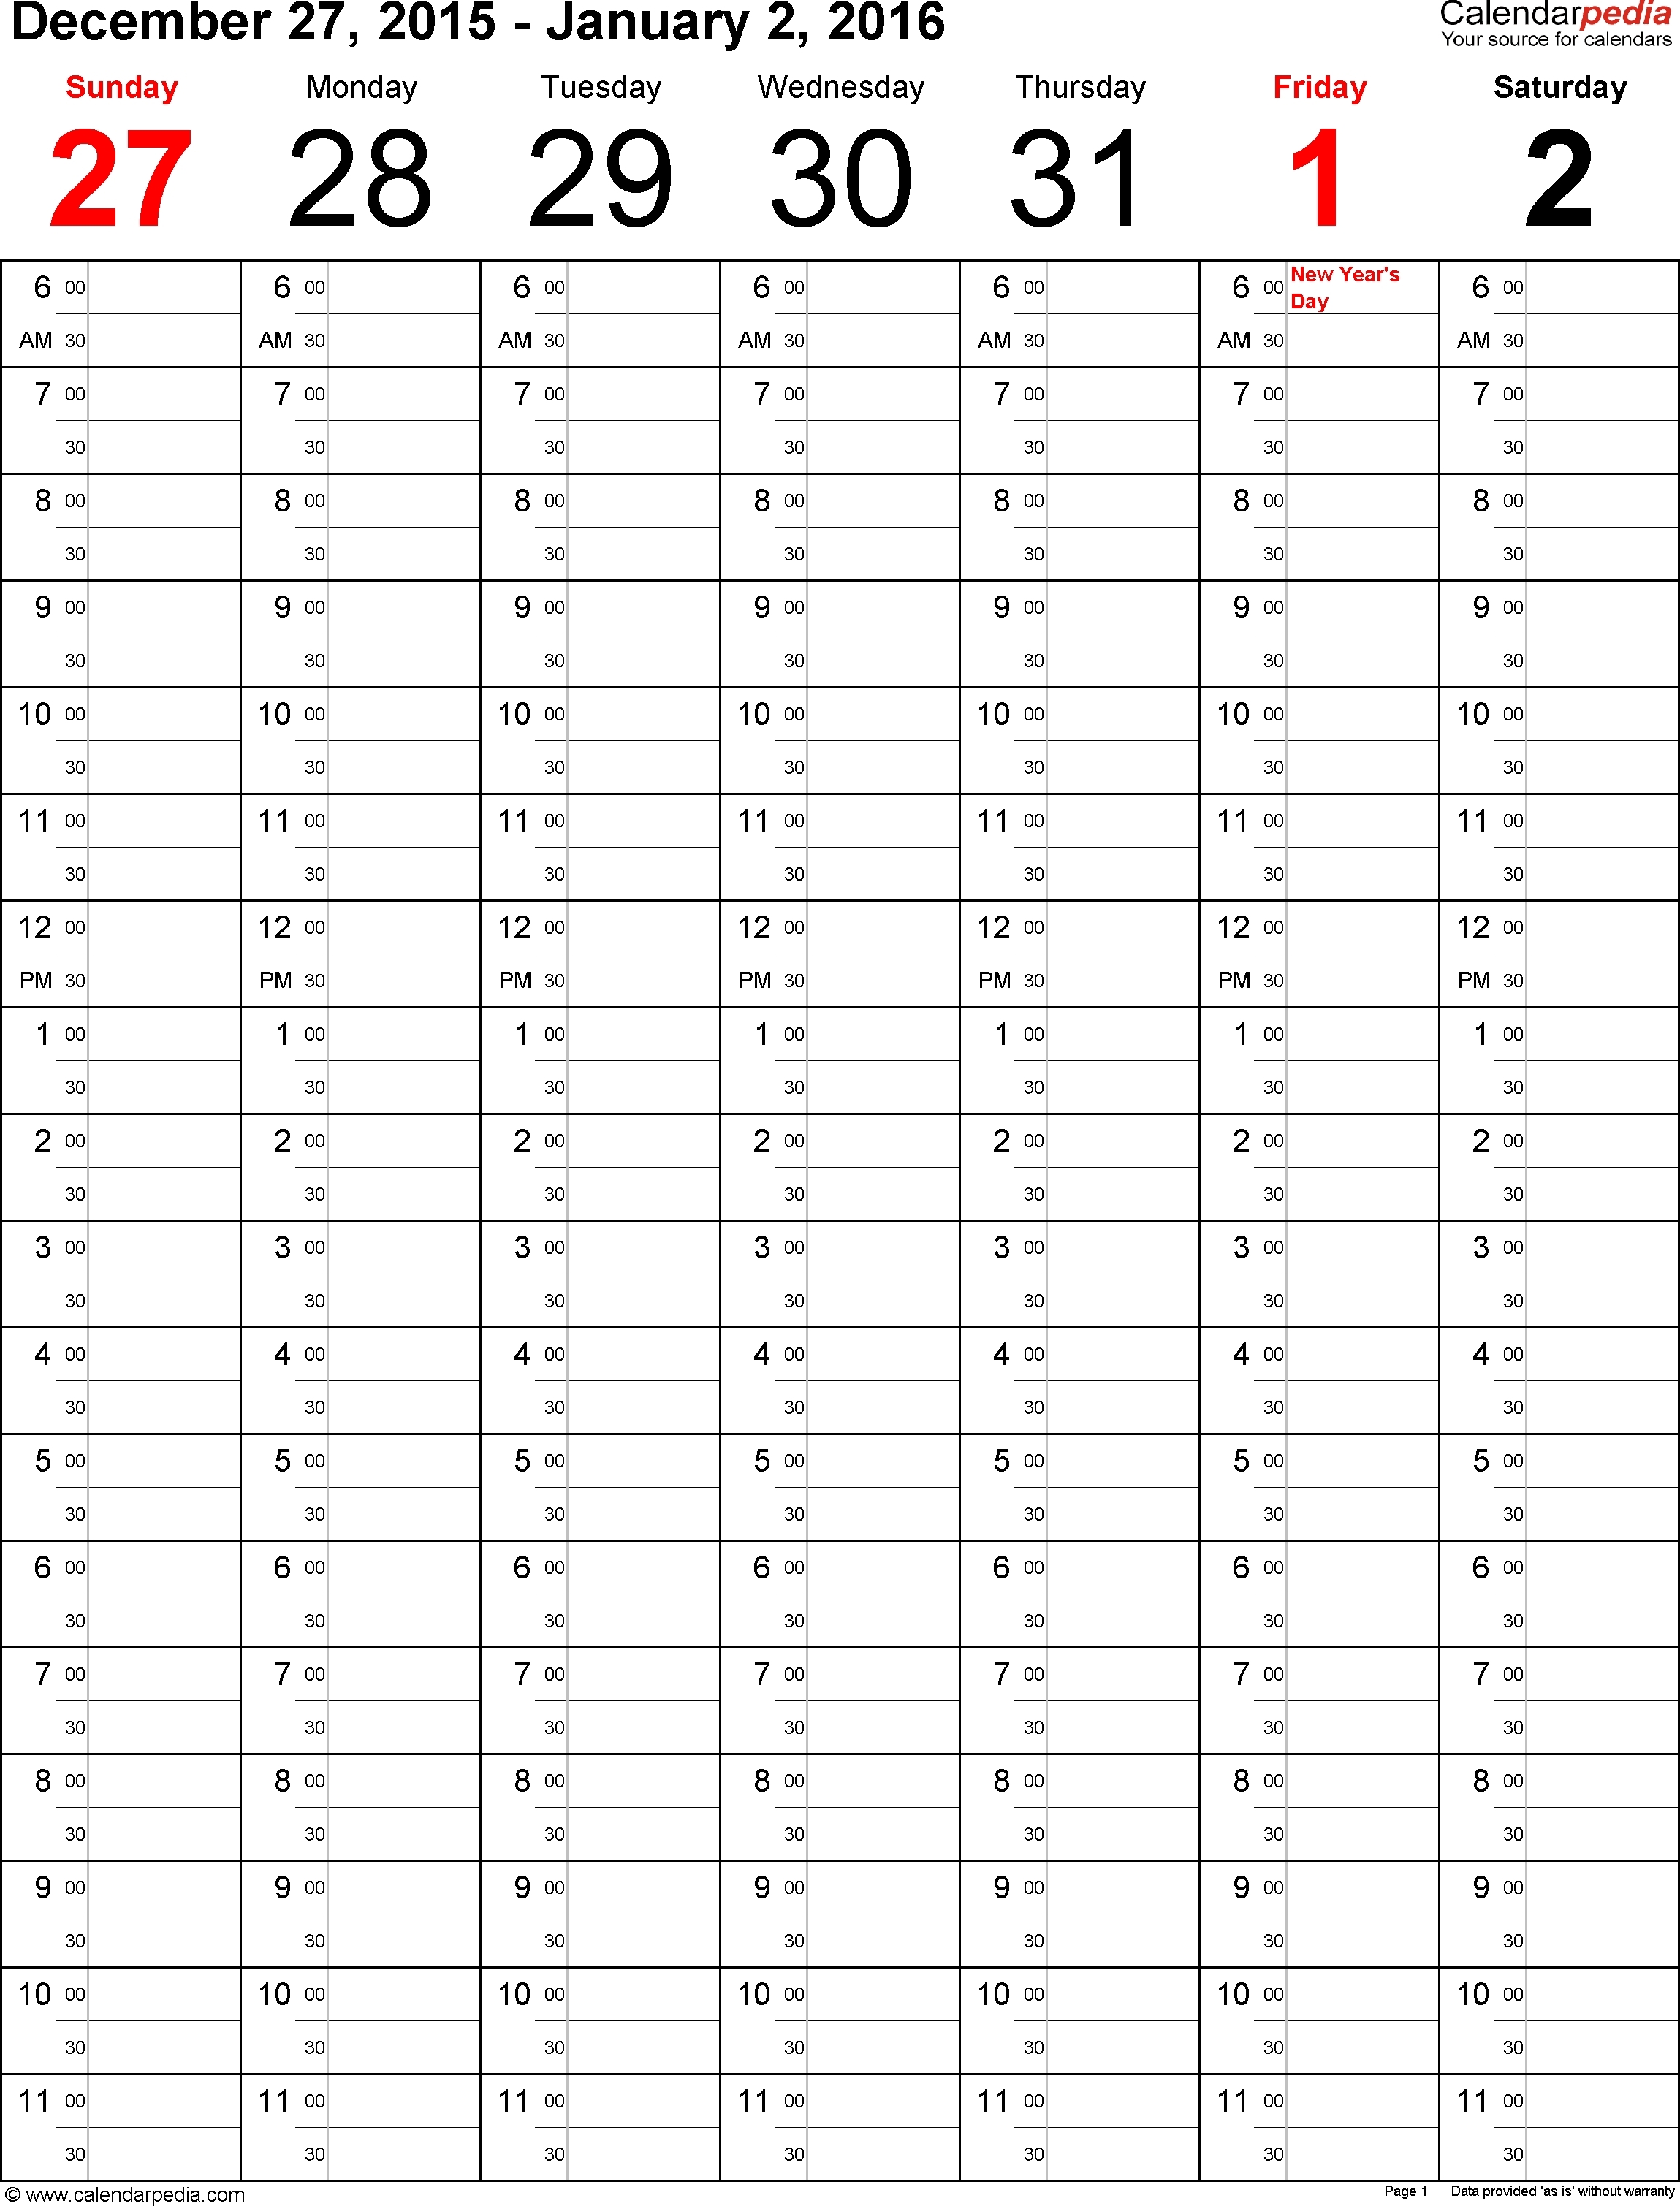 Yearly Calendarweek | Printable Calendar Template within Blank Calendar 5 Day Week With Times